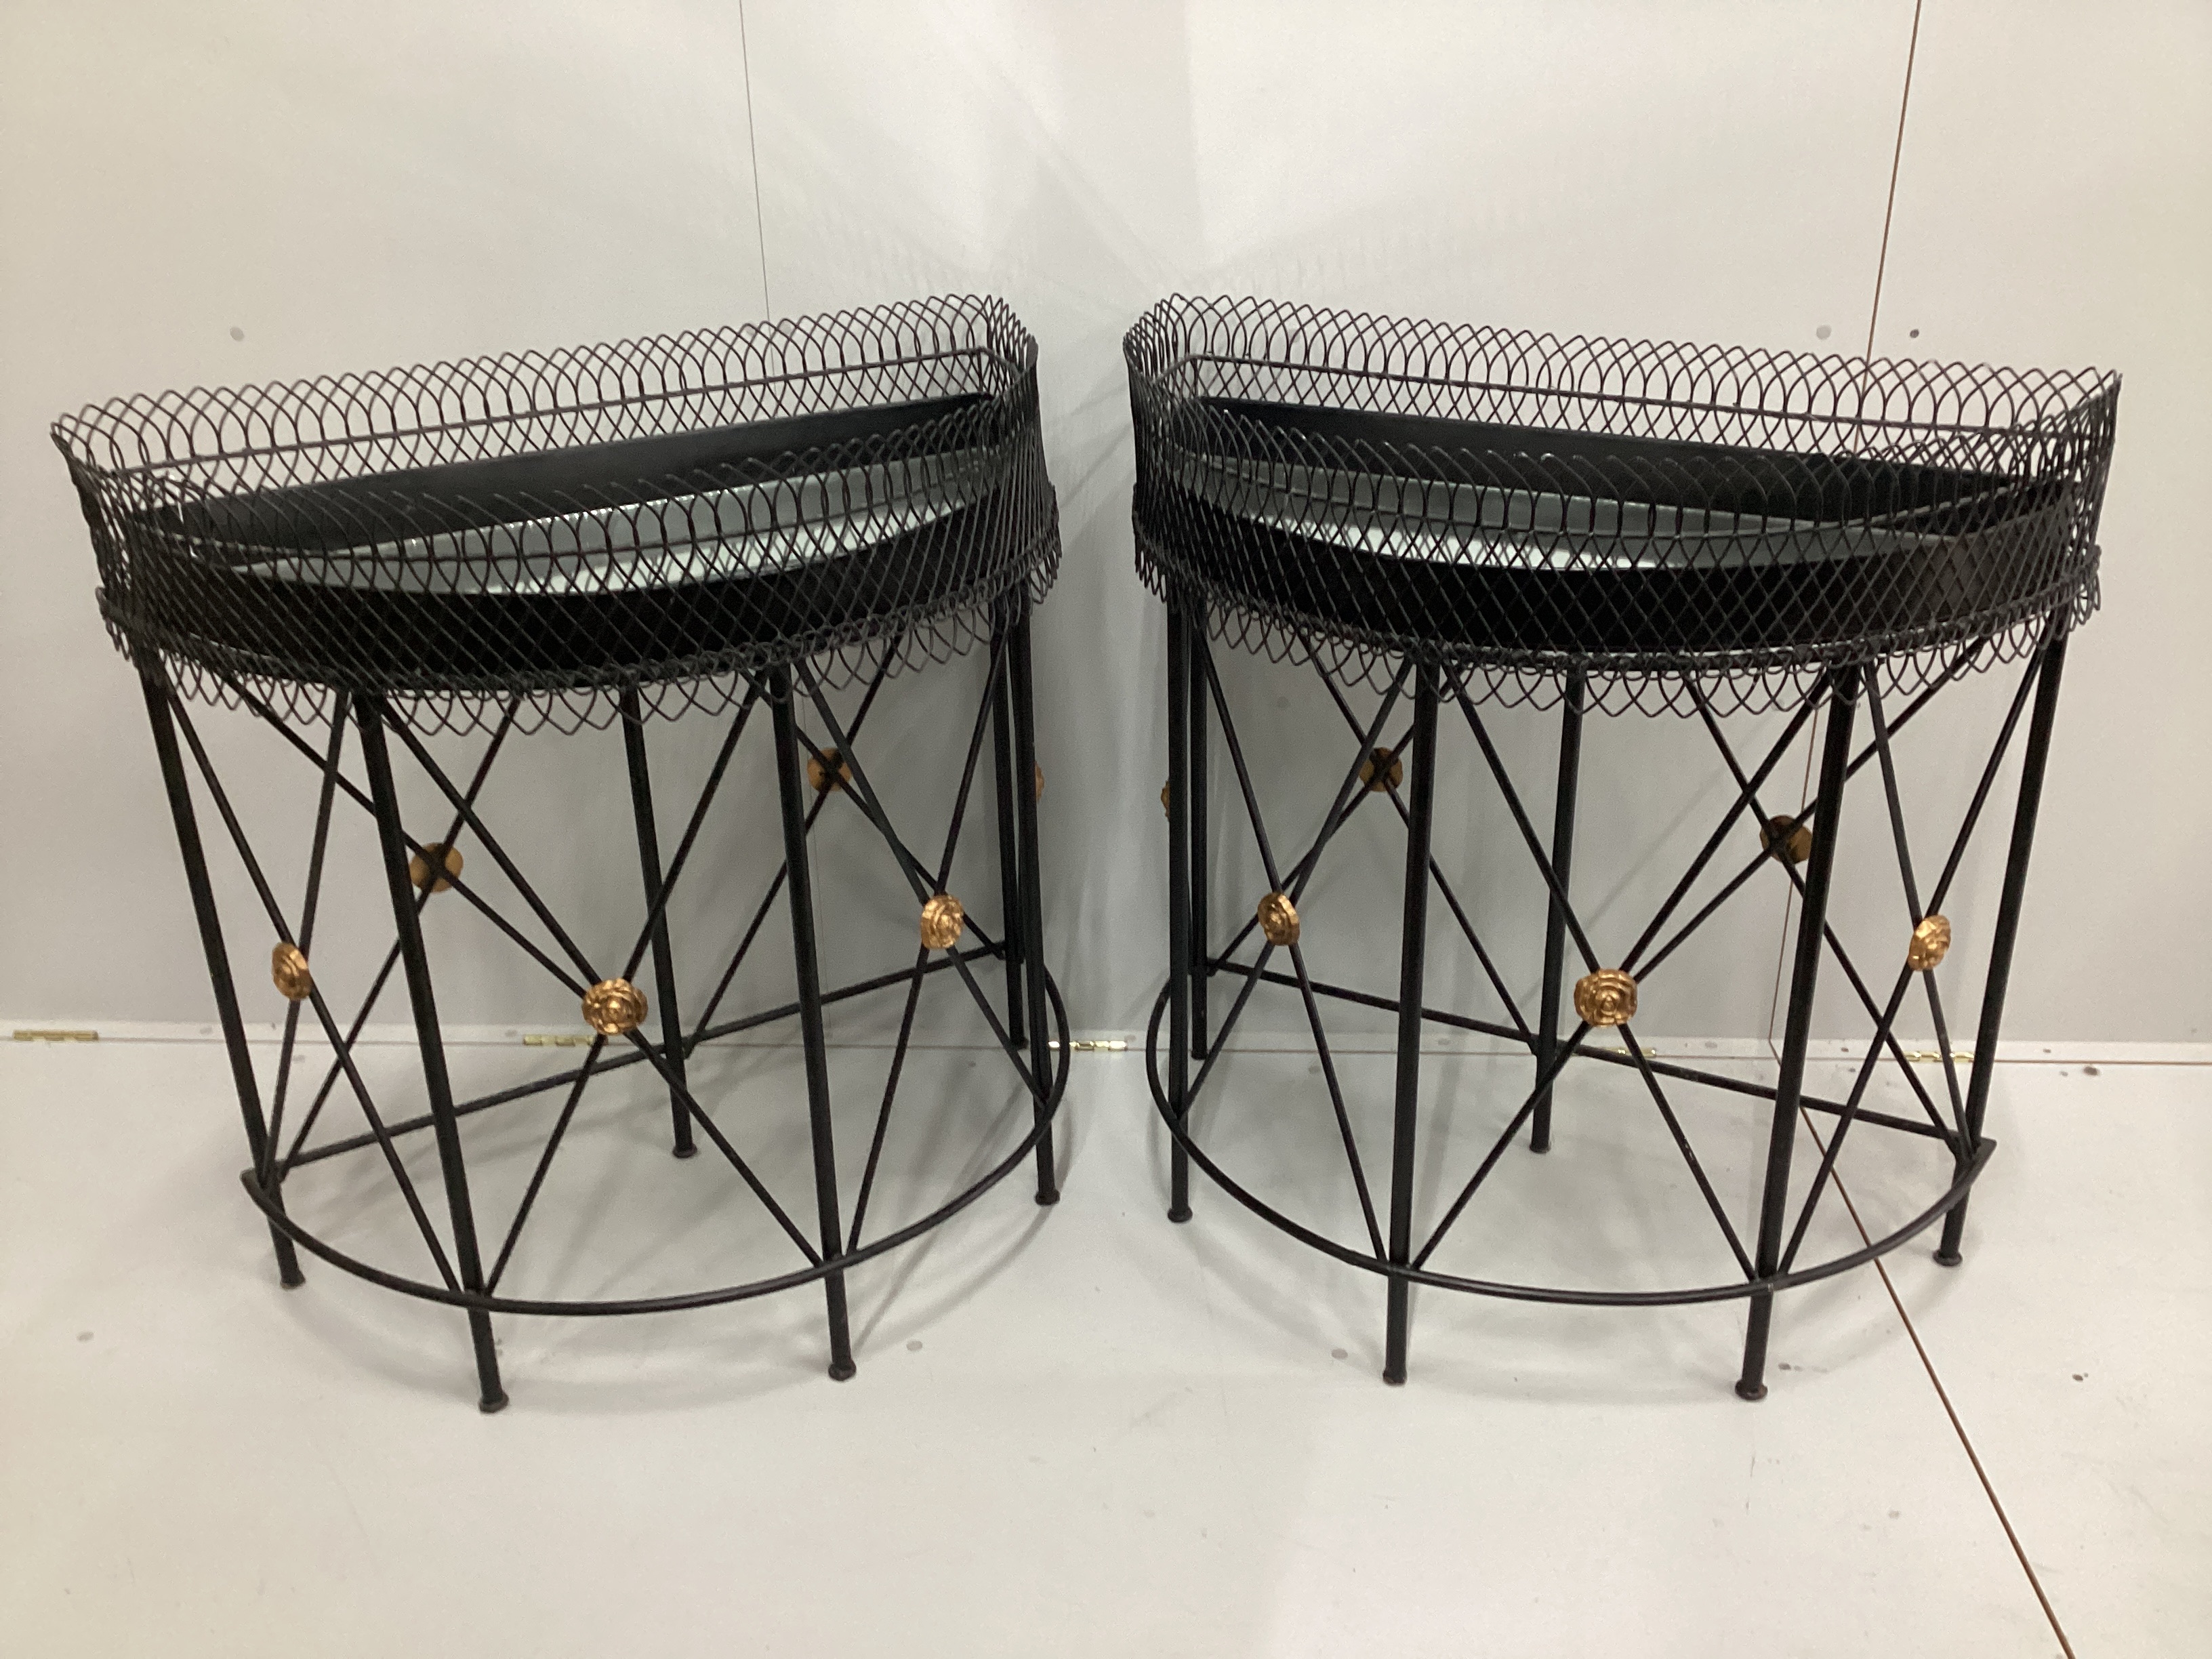 A pair of contemporary wrought iron and wirework 'D' shaped console tables with mirrored tray inserts, width 94cm, depth 52cm, height 94cm